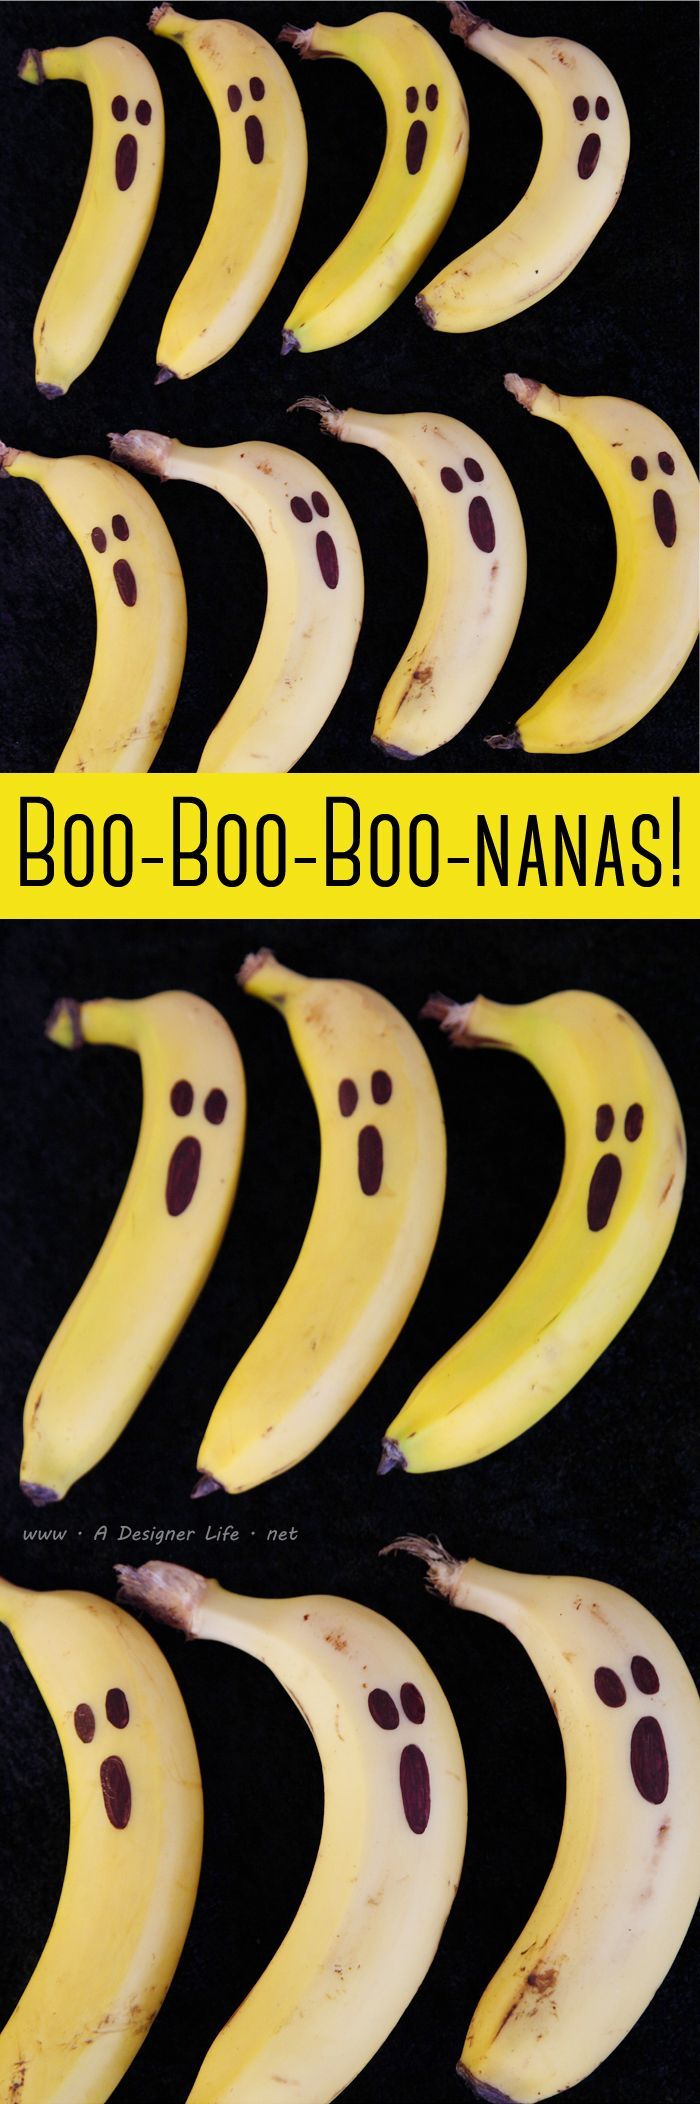 ‘Like’ to vote for @Jessica Lea Dunn’s Boo-Boo-Boo-Nanas! #HSPinParty